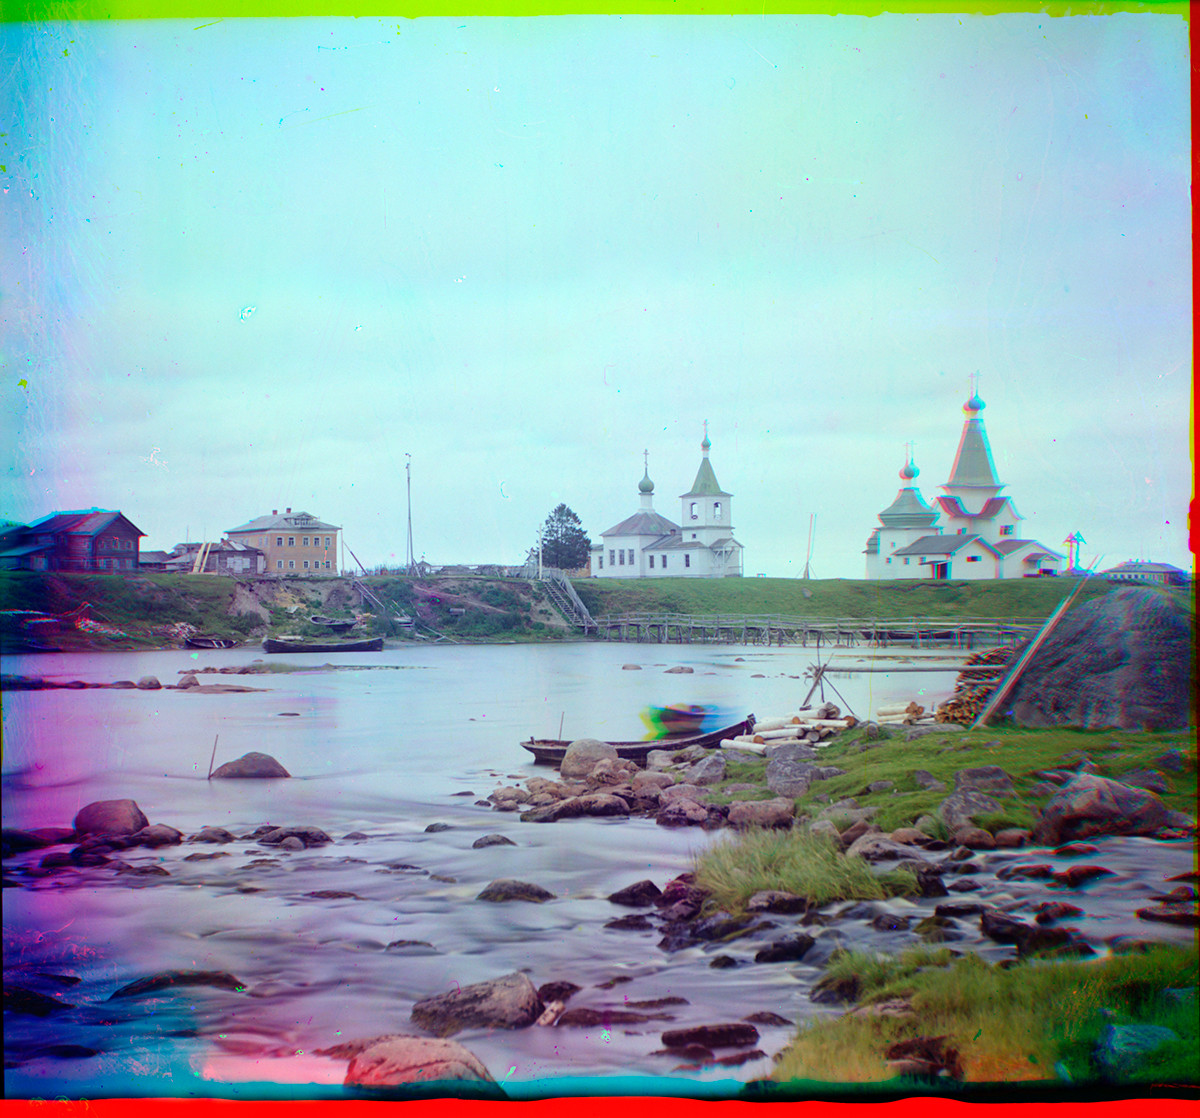 Shuyeretskoye. View across Shuya River with wooden Church of St. Clement (center), Church of St. Paraskeva & St. Nicholas Church. Smudge in the skiff is a person moving during the three exposures of the color process. Summer 1916